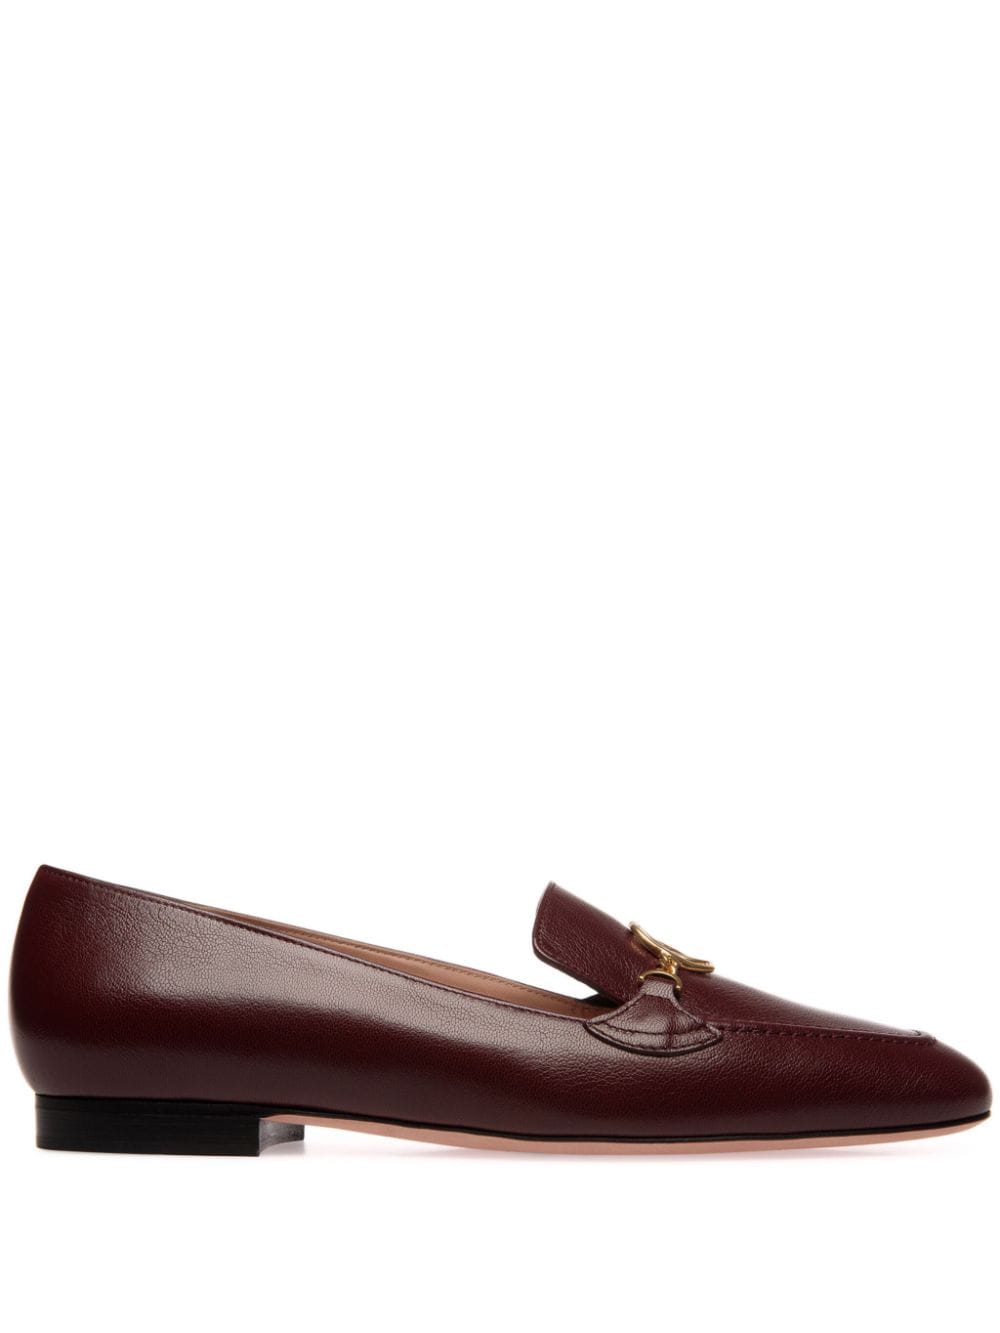 Daily Emblem leather loafers